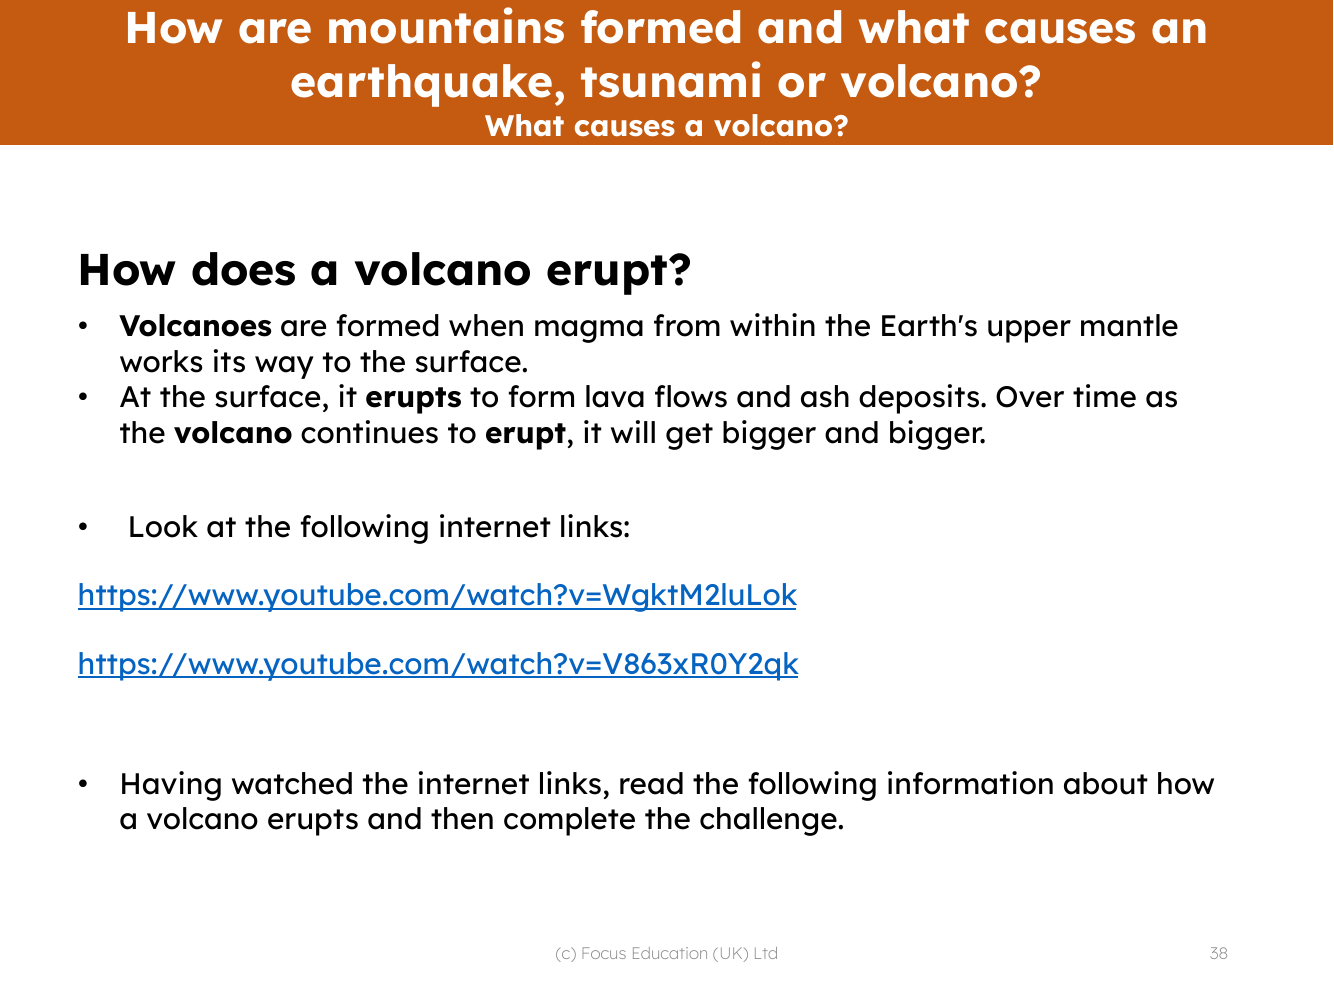 How does a volcano erupt - Info pack